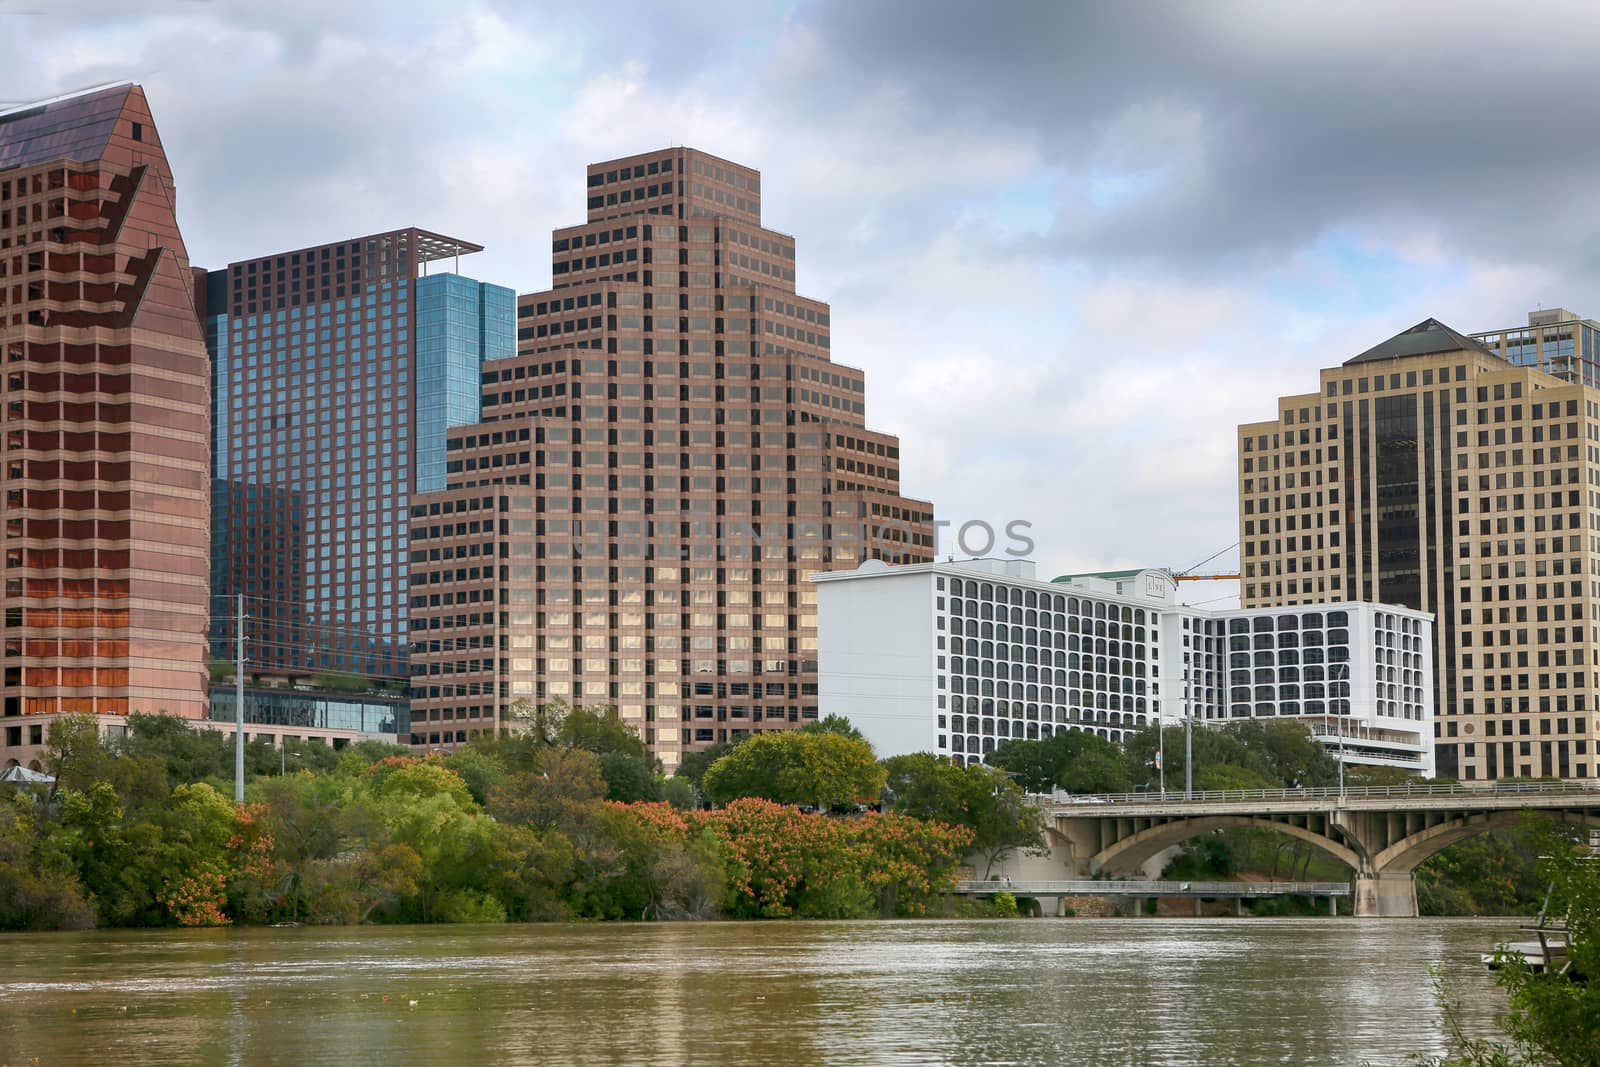 Austin, Texas: A downtown skyline on the Colorado River. Austin is the capital of the U.S. state of Texas and "world capital of life music".